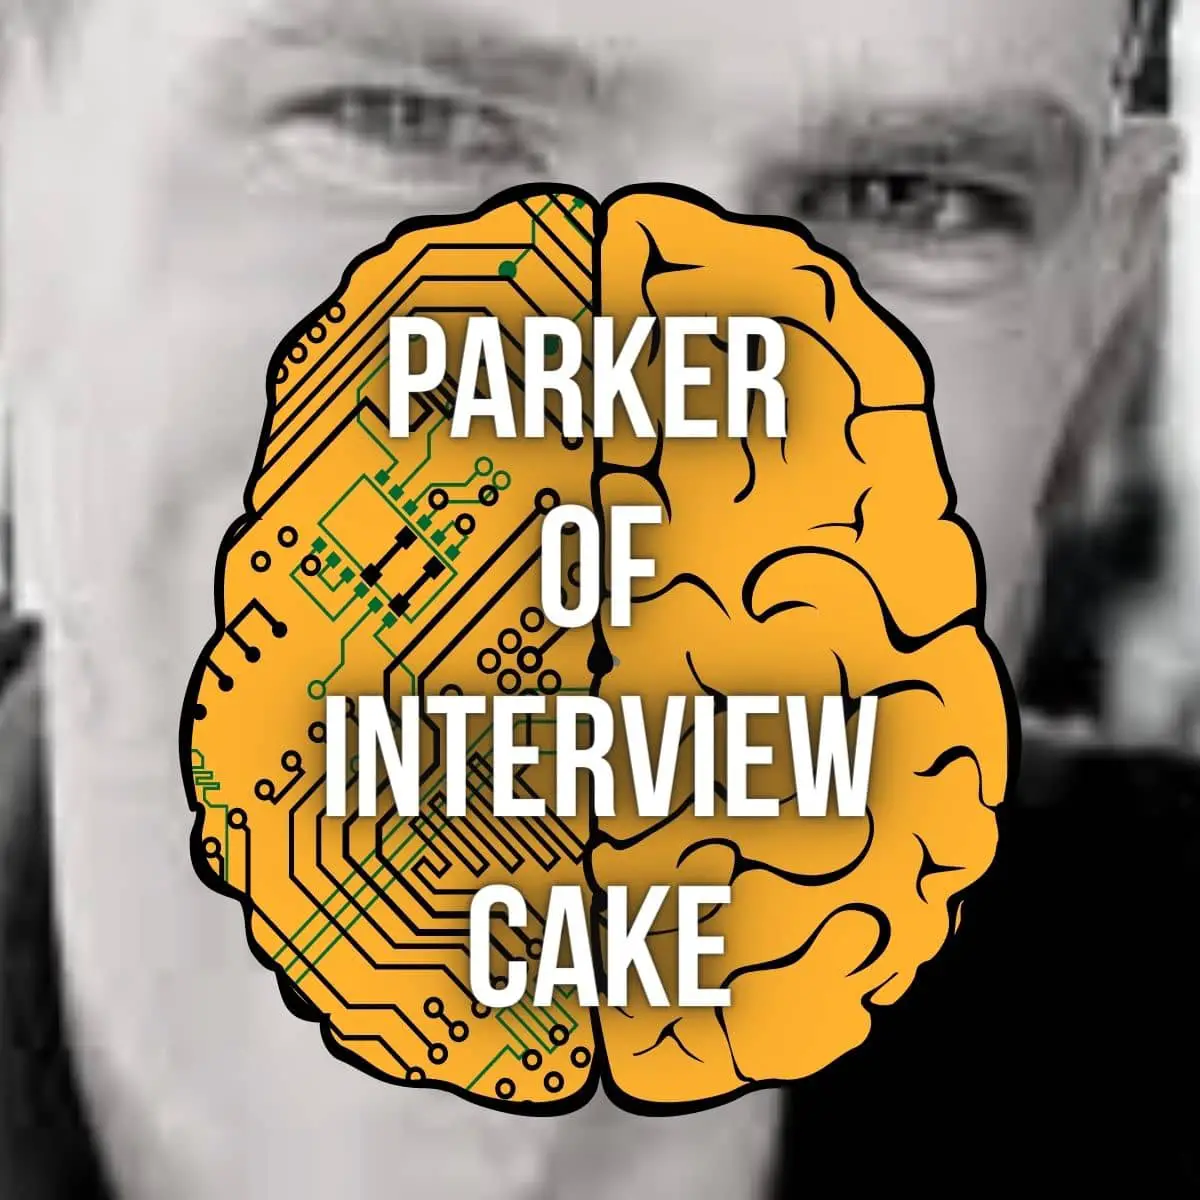 Interview Cake founder Parker Phinney